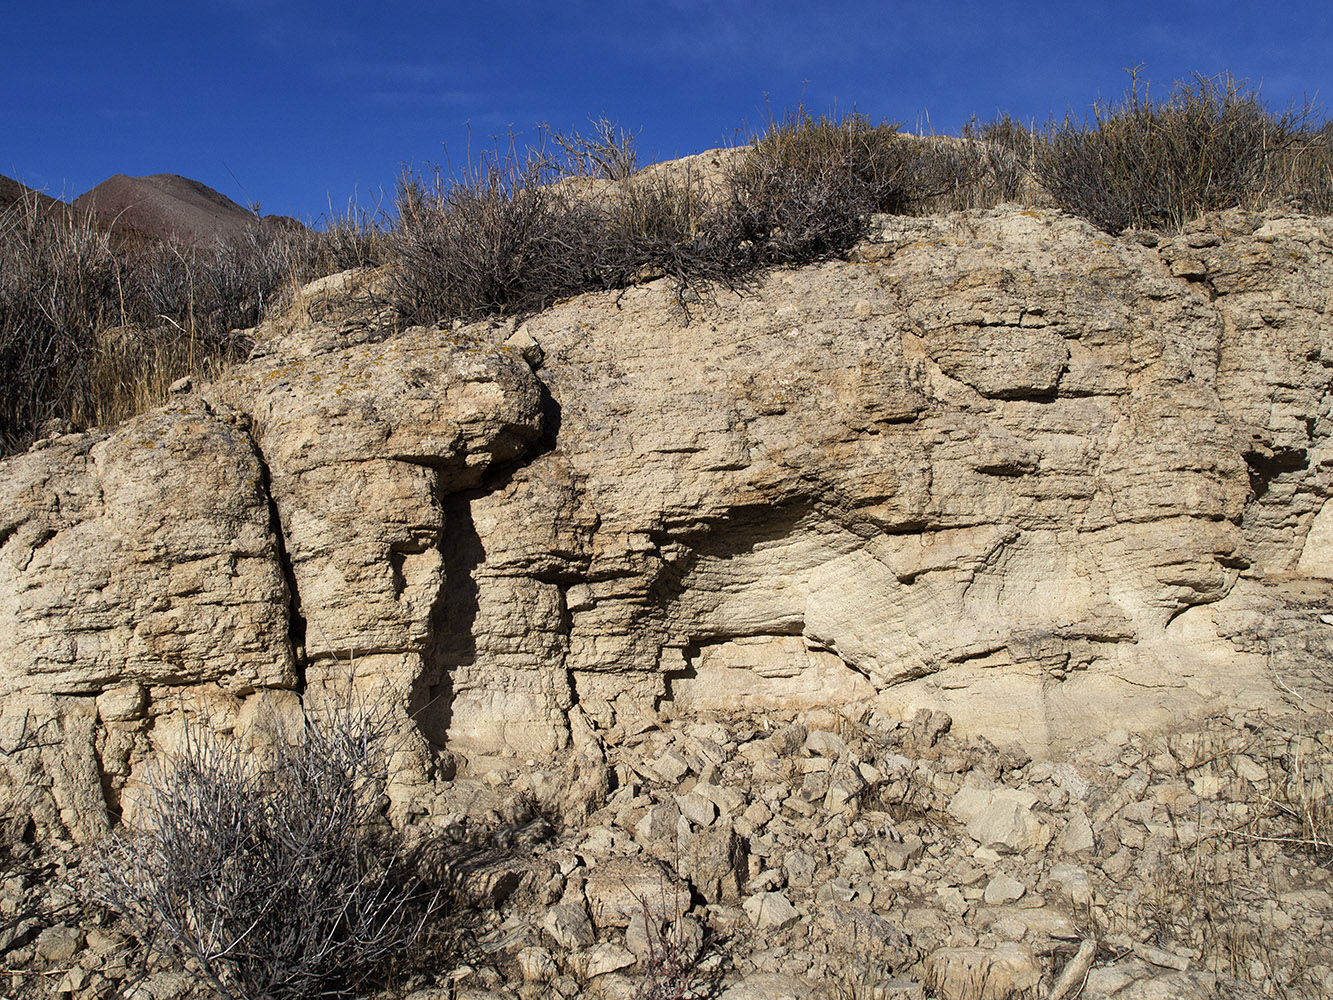 Volcanic tuff in an area next to Titus Canyon Road on the way to Red Pass.